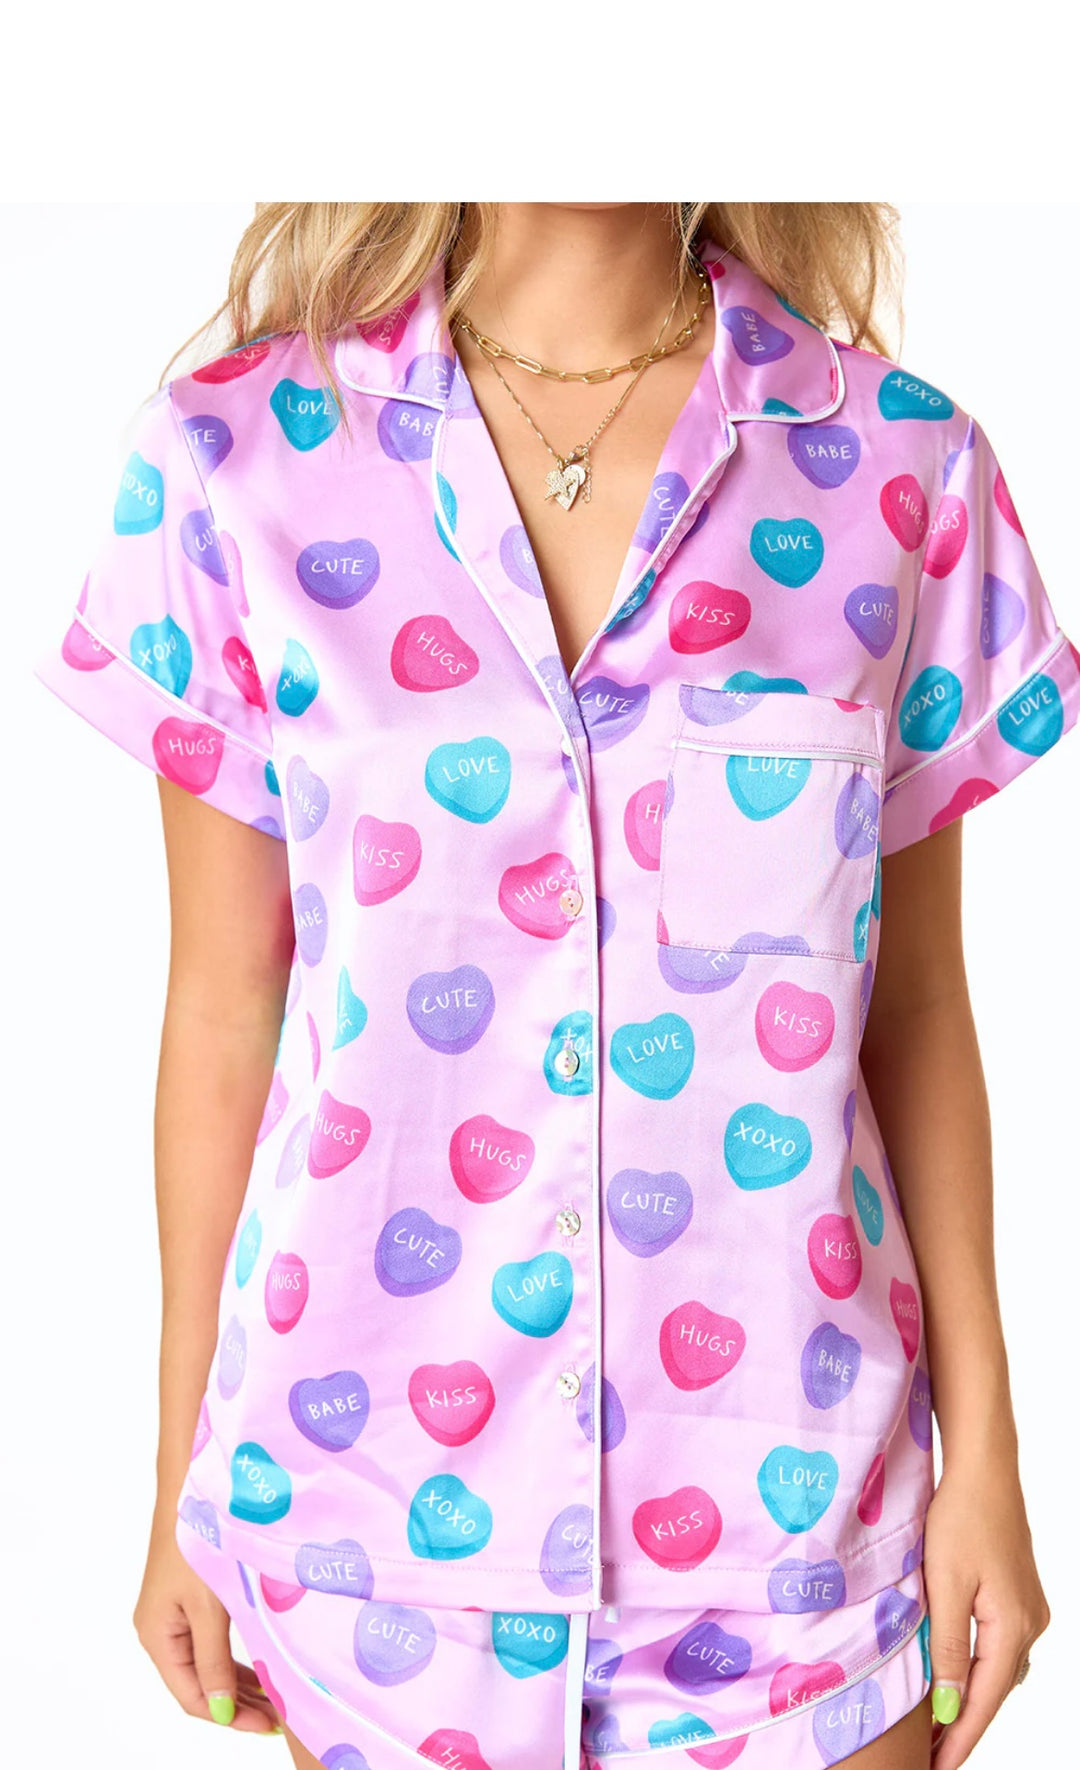 Aurora Sweet Hearts Pajama Set-Outfits-Buddy Love-Shop with Bloom West Boutique, Women's Fashion Boutique, Located in Houma, Louisiana